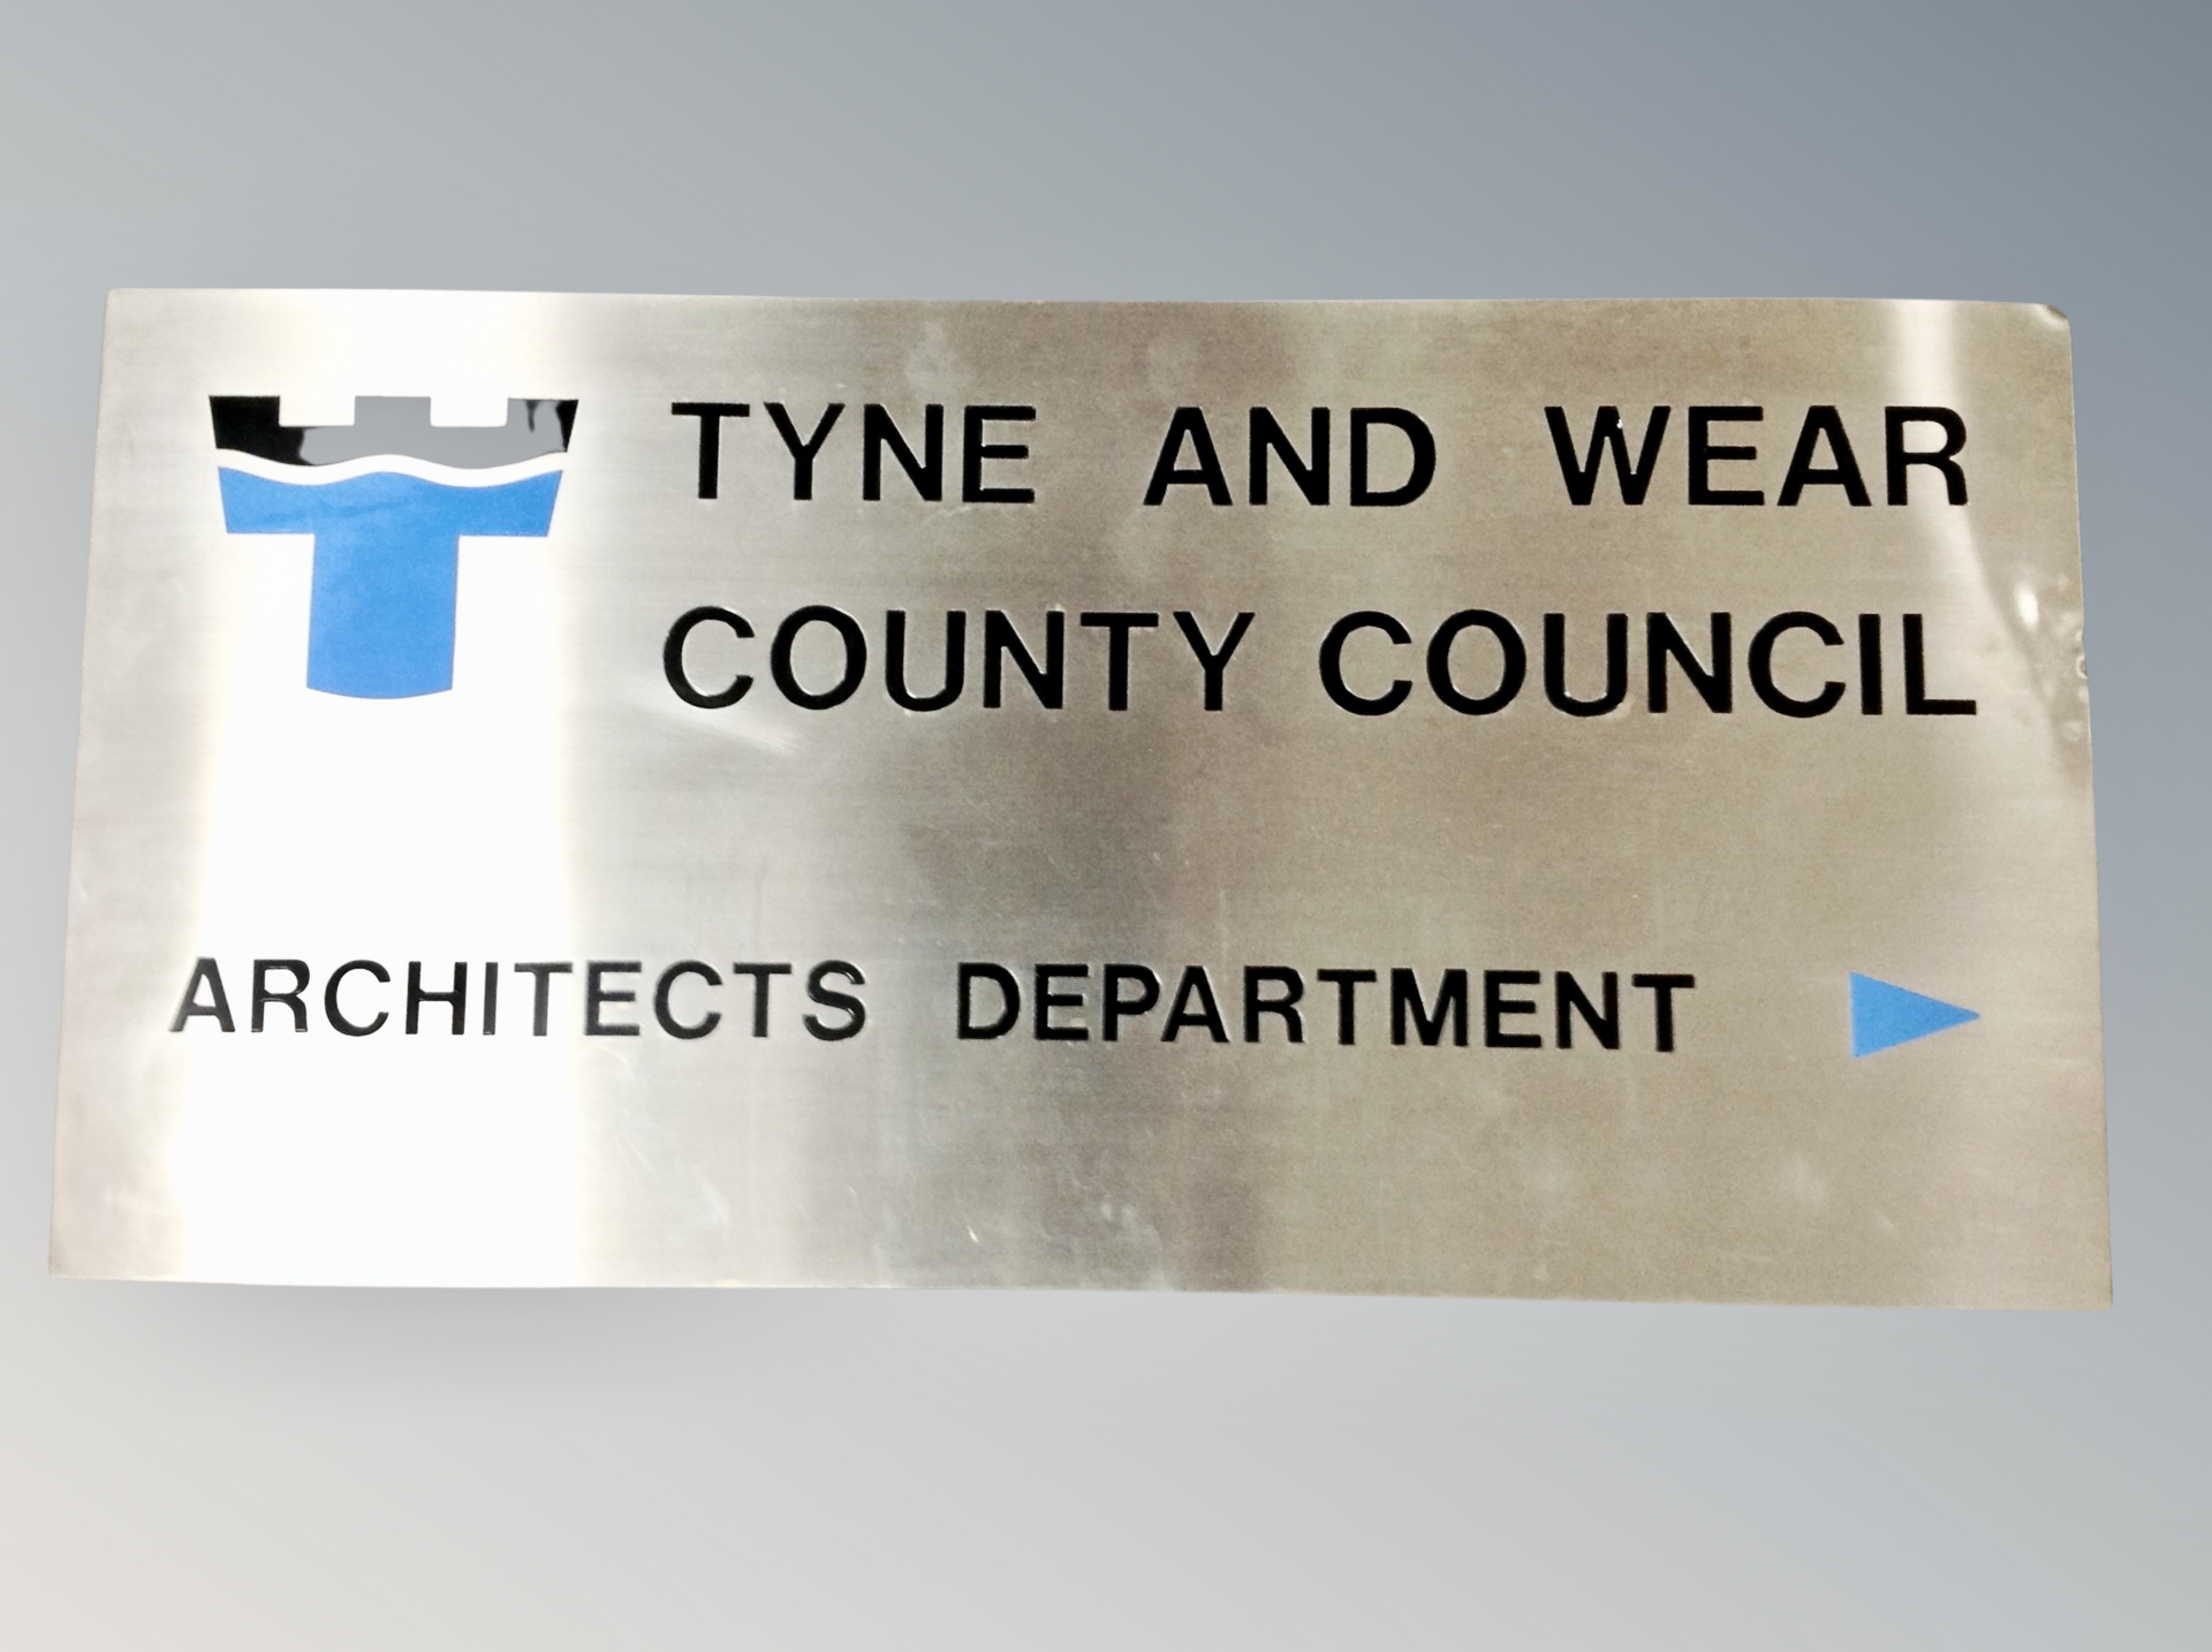 A Tyne and Wear County Council Architects Department metal sign